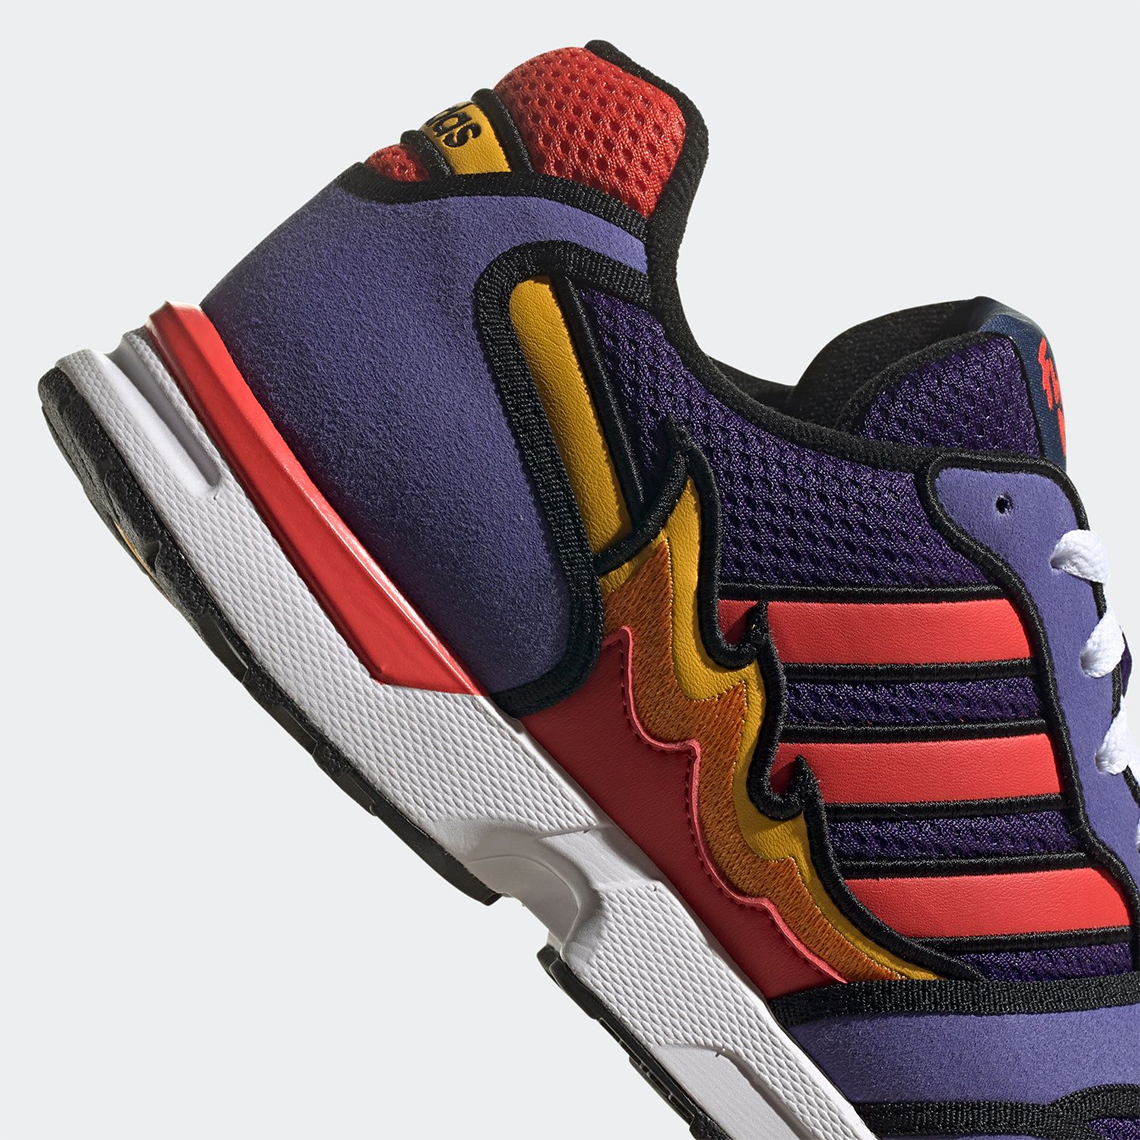 Flaming Moe's adidas ZX 1000 C The Simpsons H05790 | SneakerNews.com